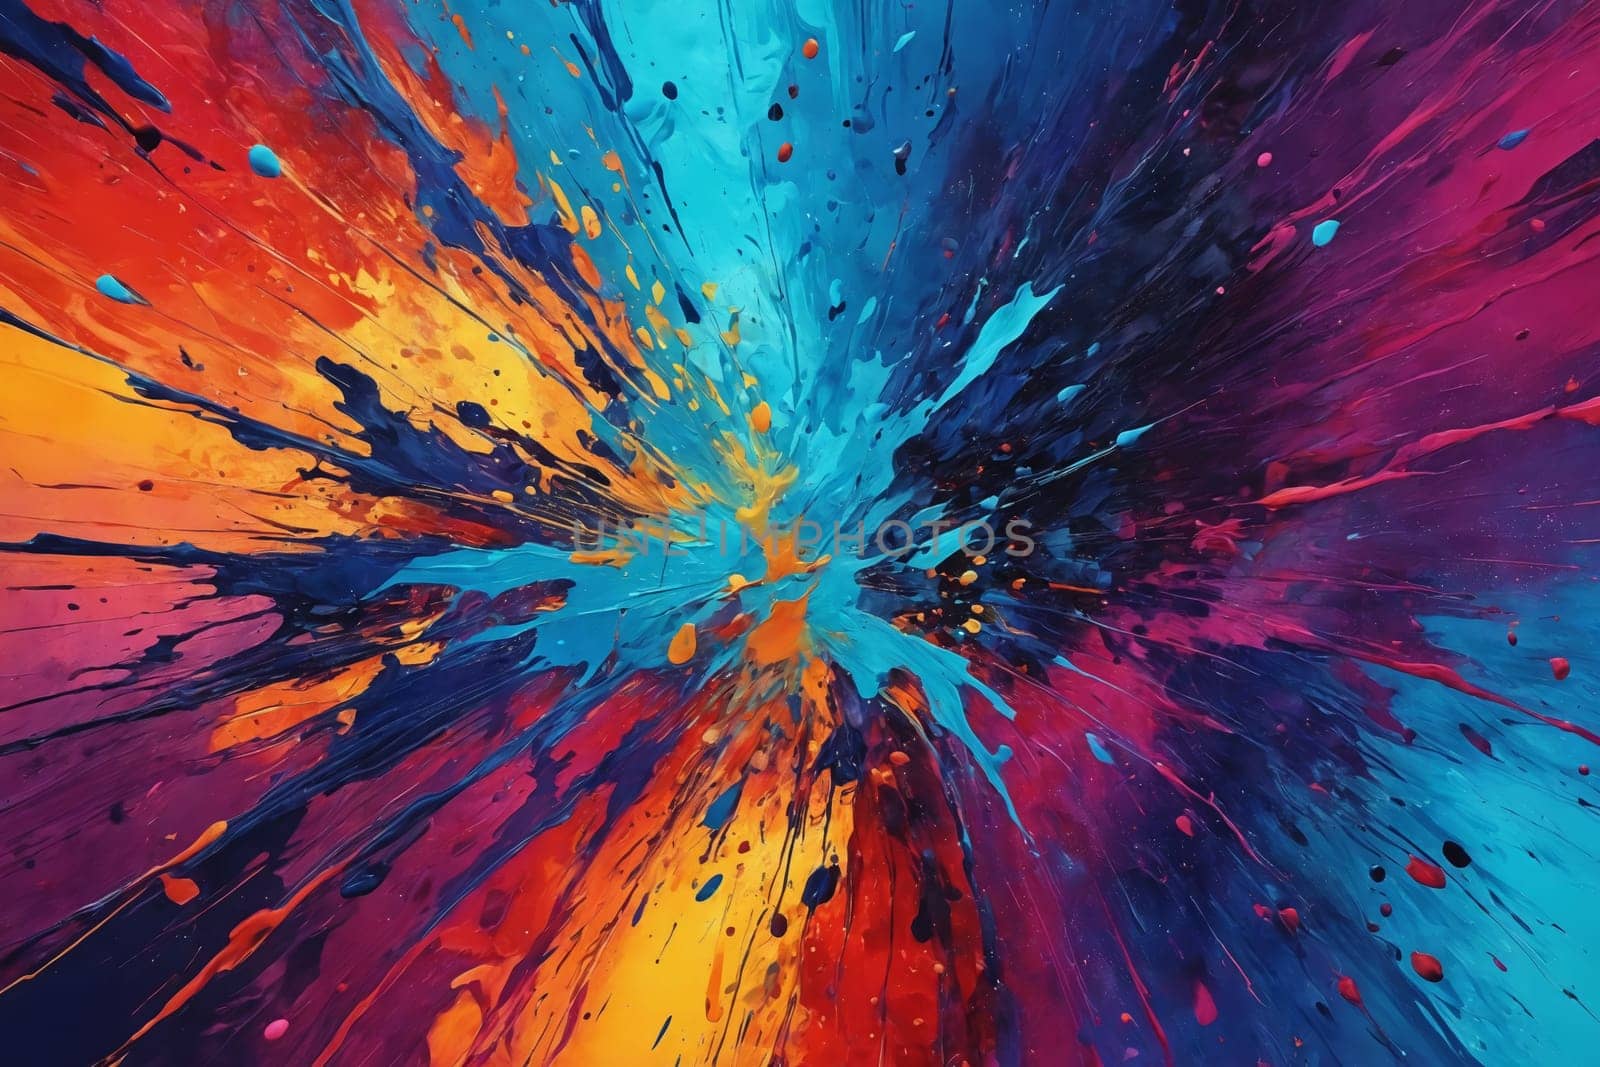 Symphony of Vibrancy: An Extreme Close-up of Splatter Art by Andre1ns